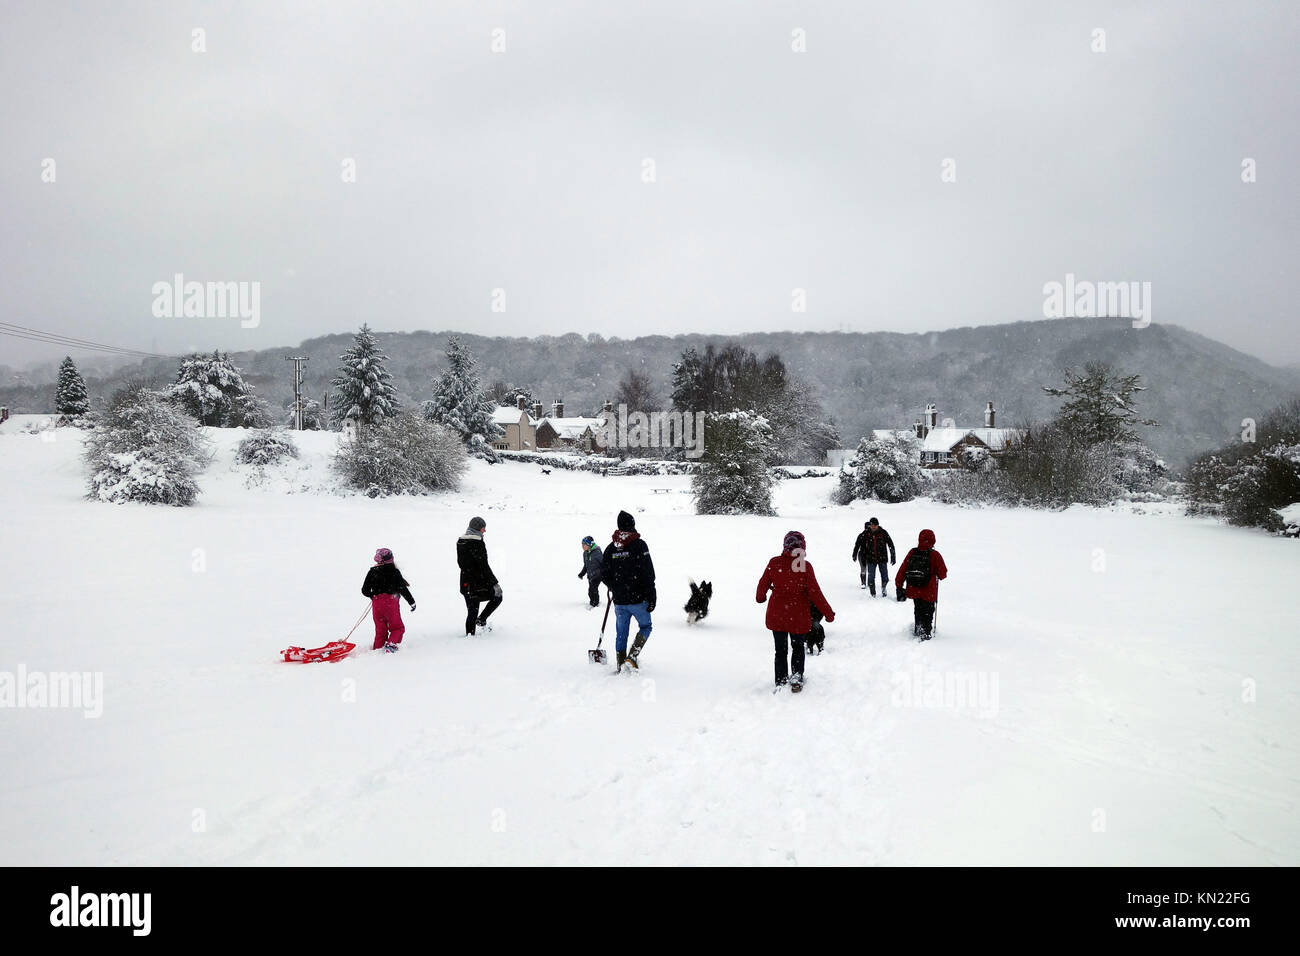 Winter scene Britain Uk families sledging on The Lodge Field, Ironbridge 2017 people children snow Families having fun in the snow on The Lodge Field after 10 inches of snow settled this weekend. Credit: David Bagnall/Alamy Live News Stock Photo